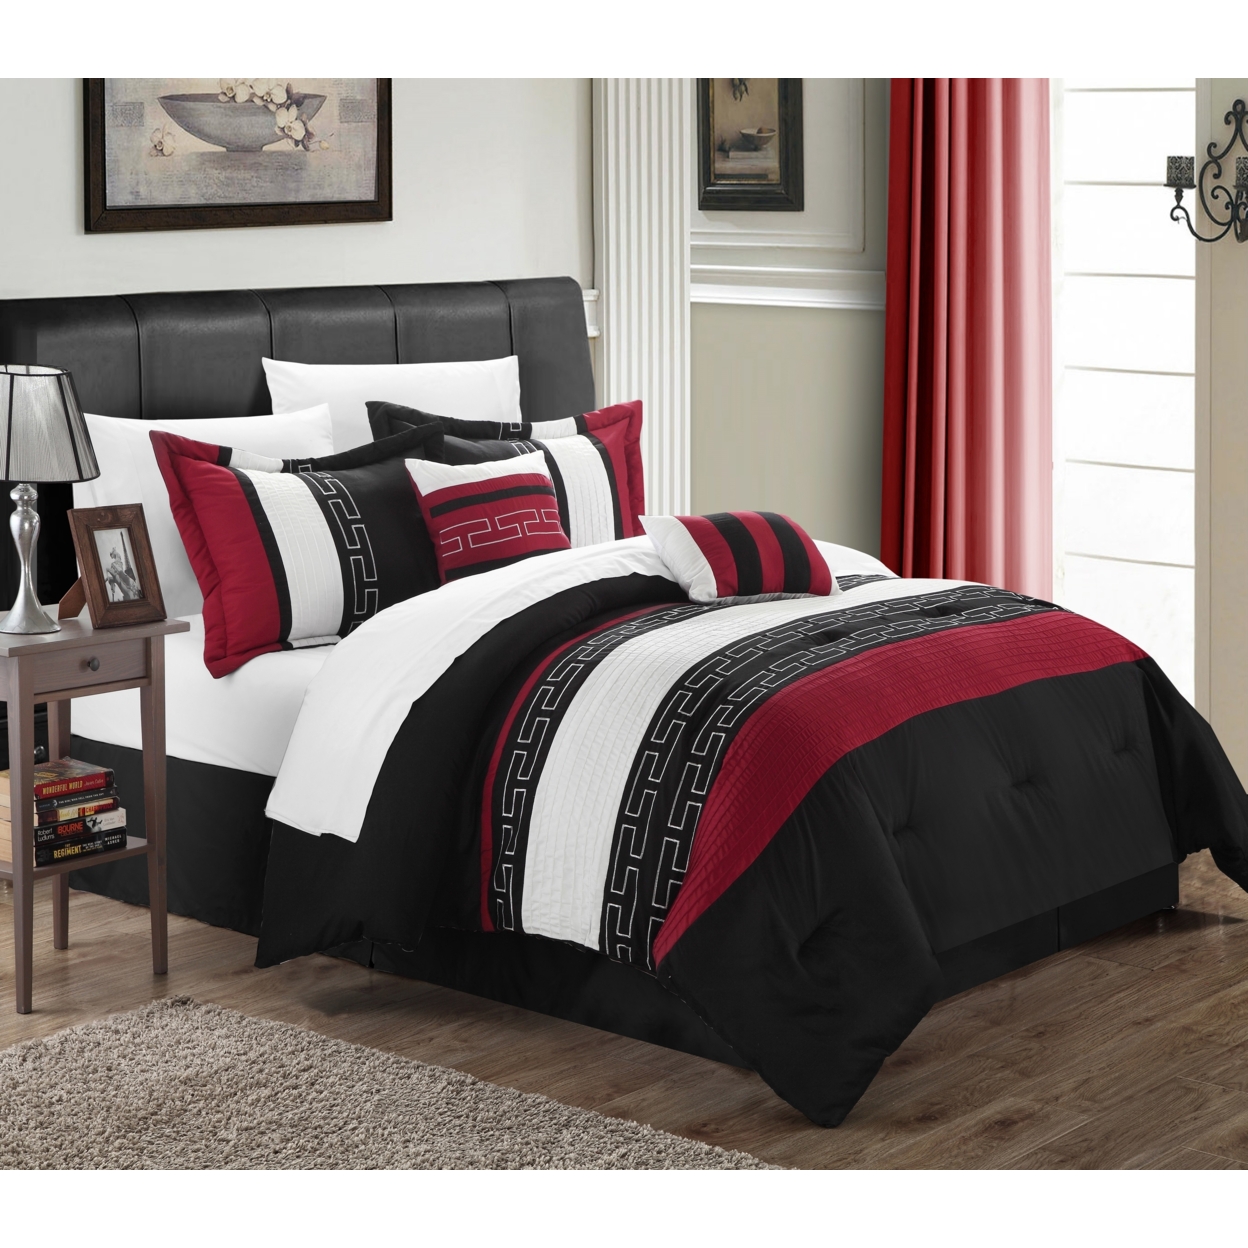 Chic Home Coralie 6-piece Comforter Set Hotel Collection - Black, King